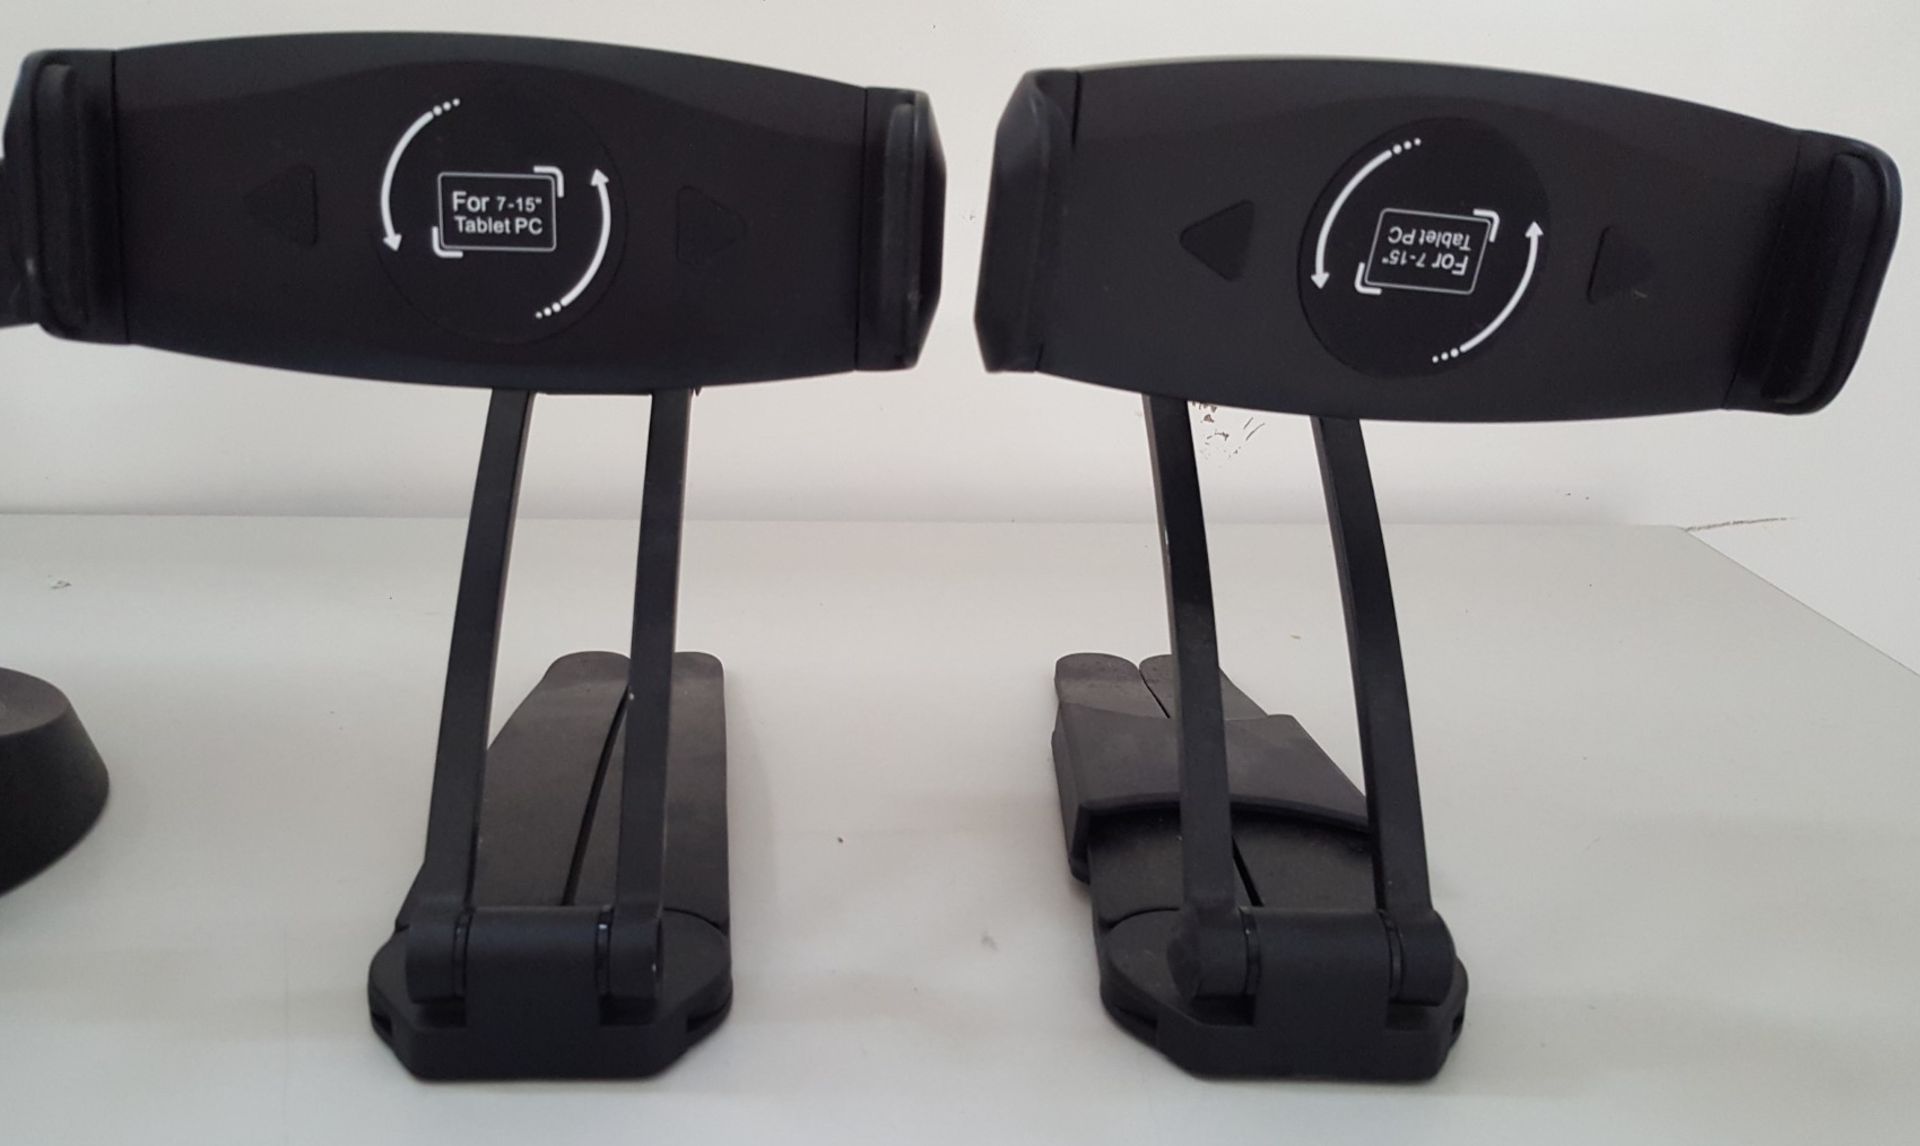 4 x Various Car Dashboard Tablet Holders - Ref CBU17 - Image 4 of 4